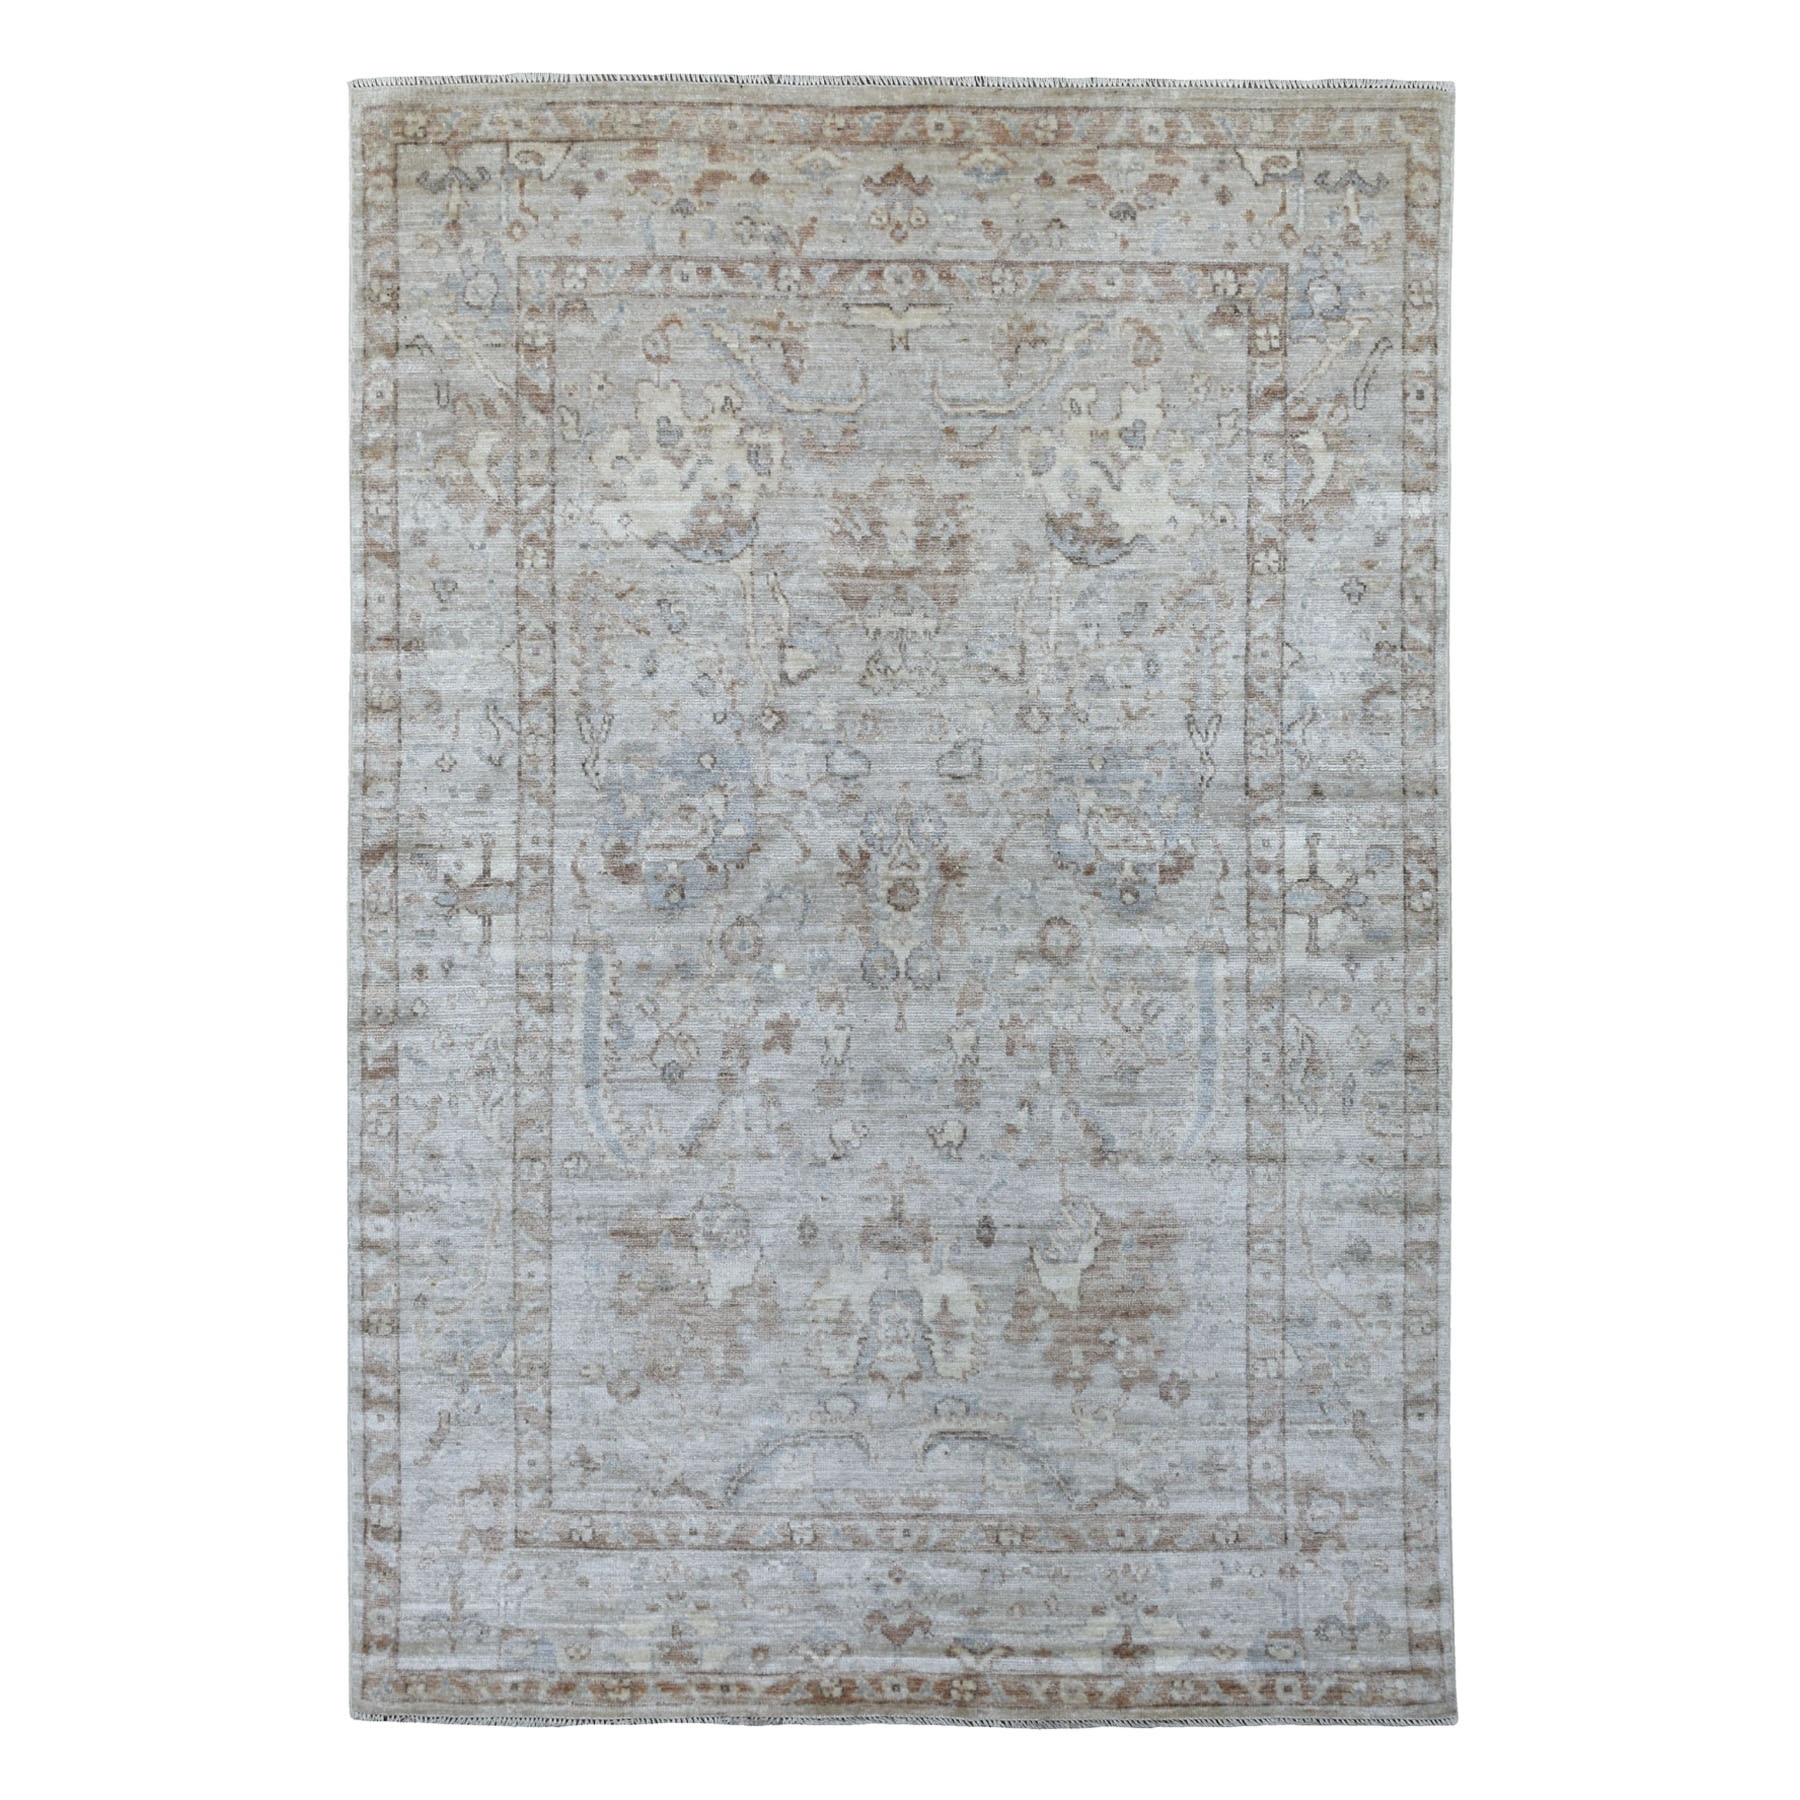 Agra And Turkish Collection Hand Knotted Grey Rug No: 1113180